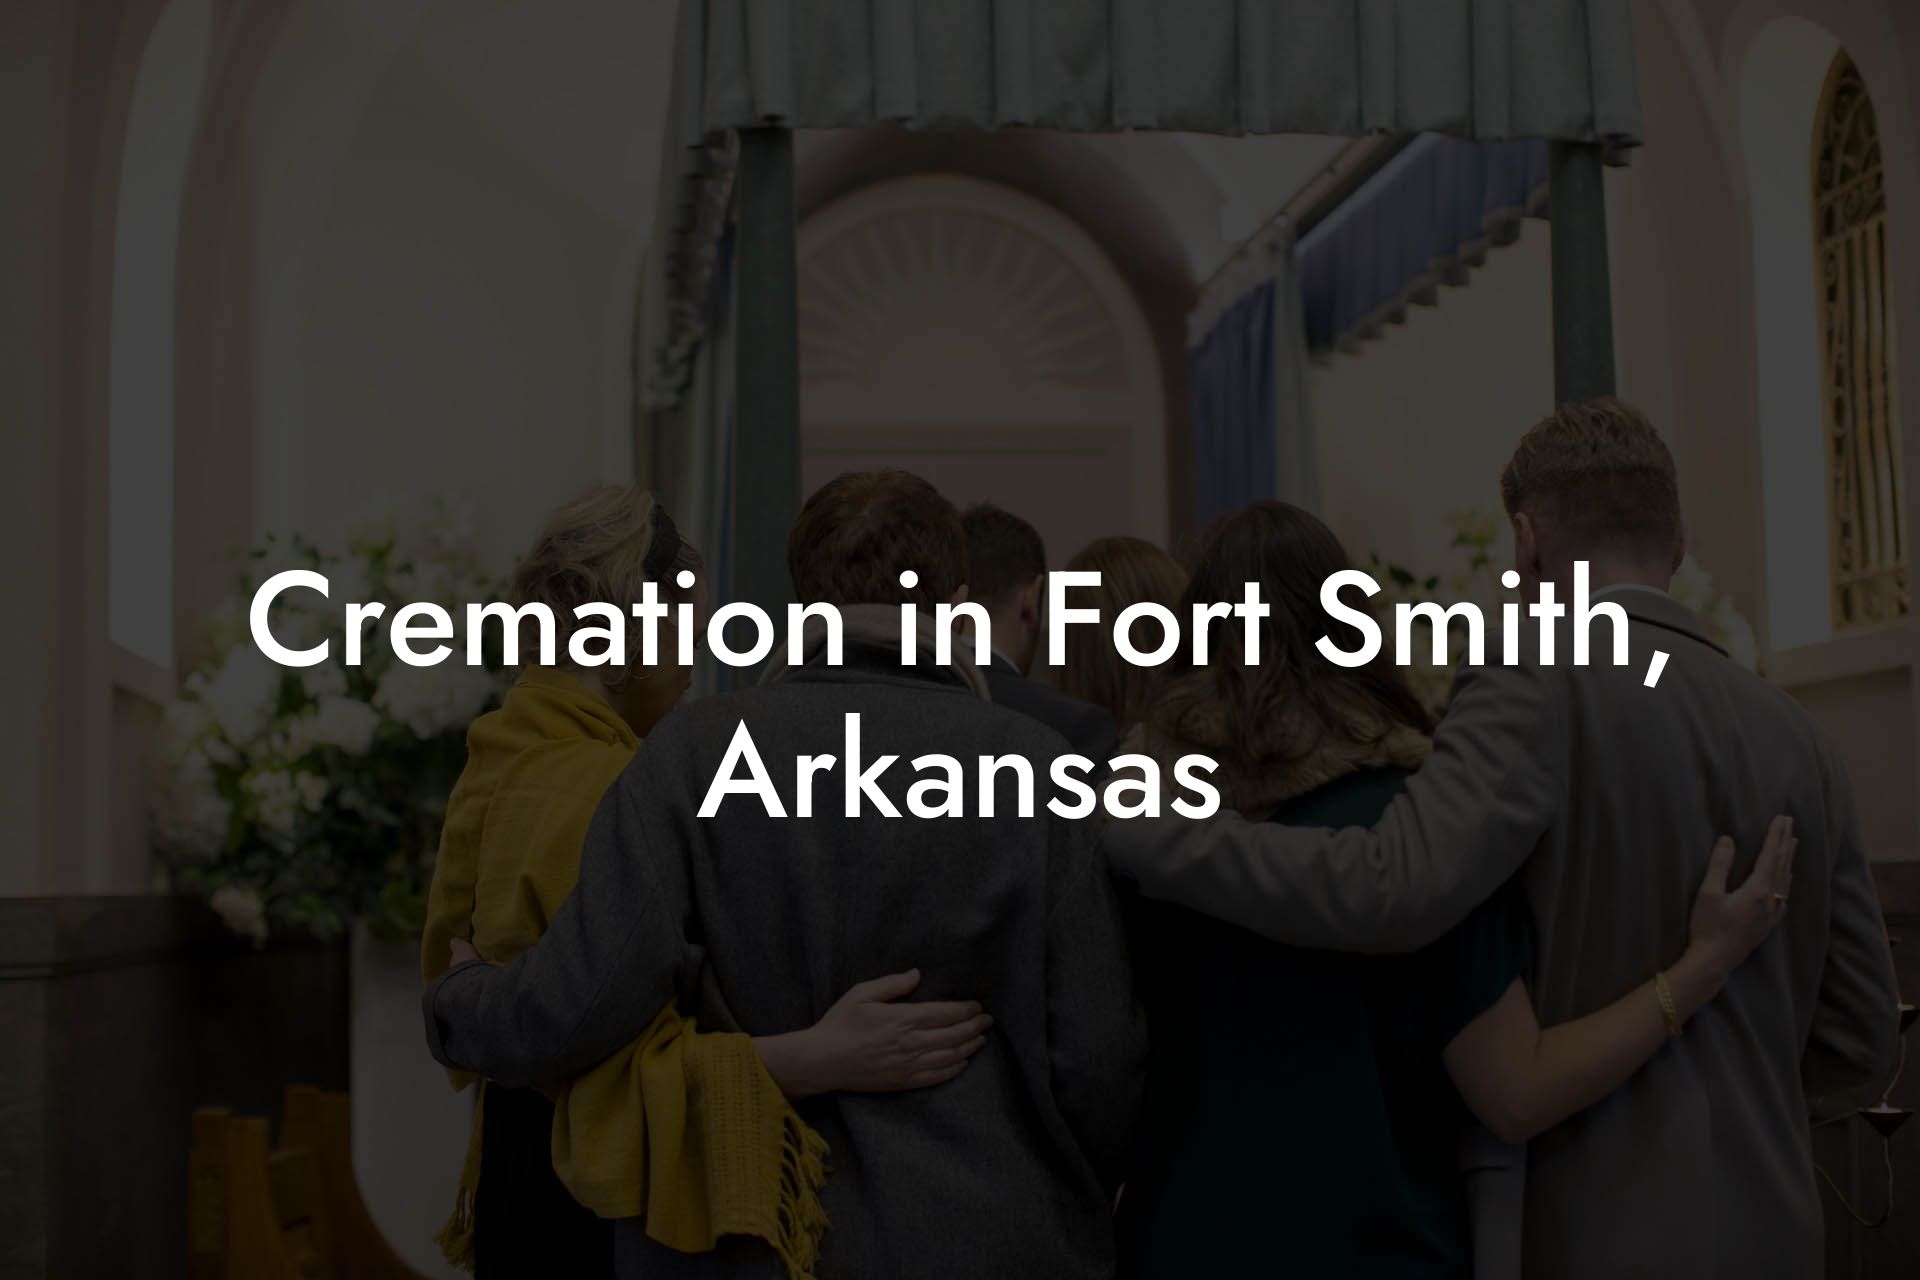 Cremation in Fort Smith, Arkansas